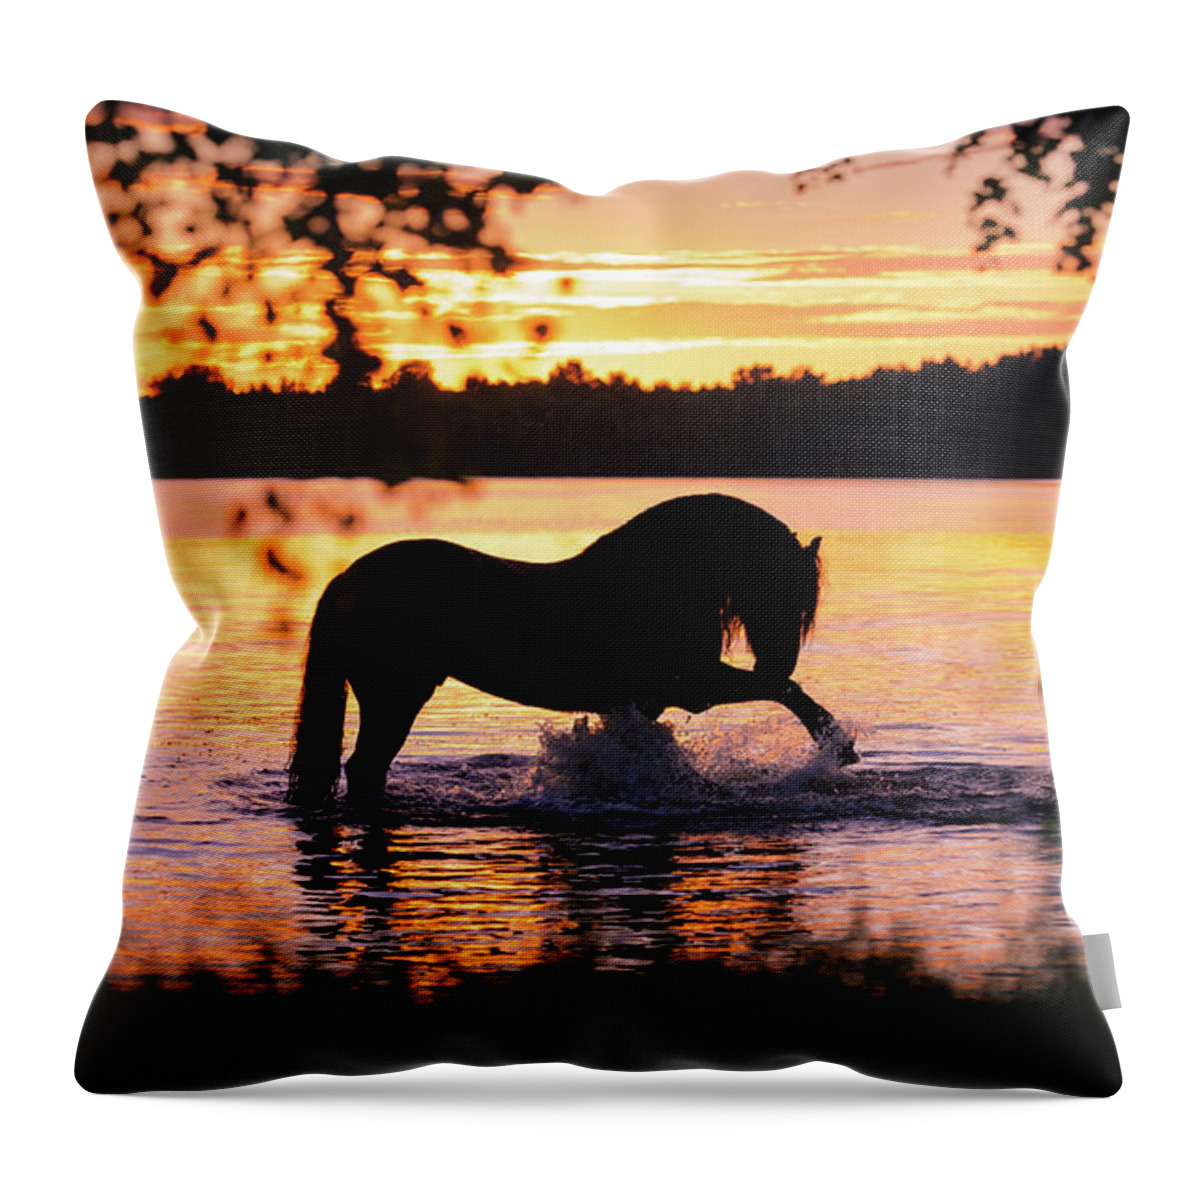 Russian Artists New Wave Throw Pillow featuring the photograph Black Horse Bathing in Sunset River by Ekaterina Druz